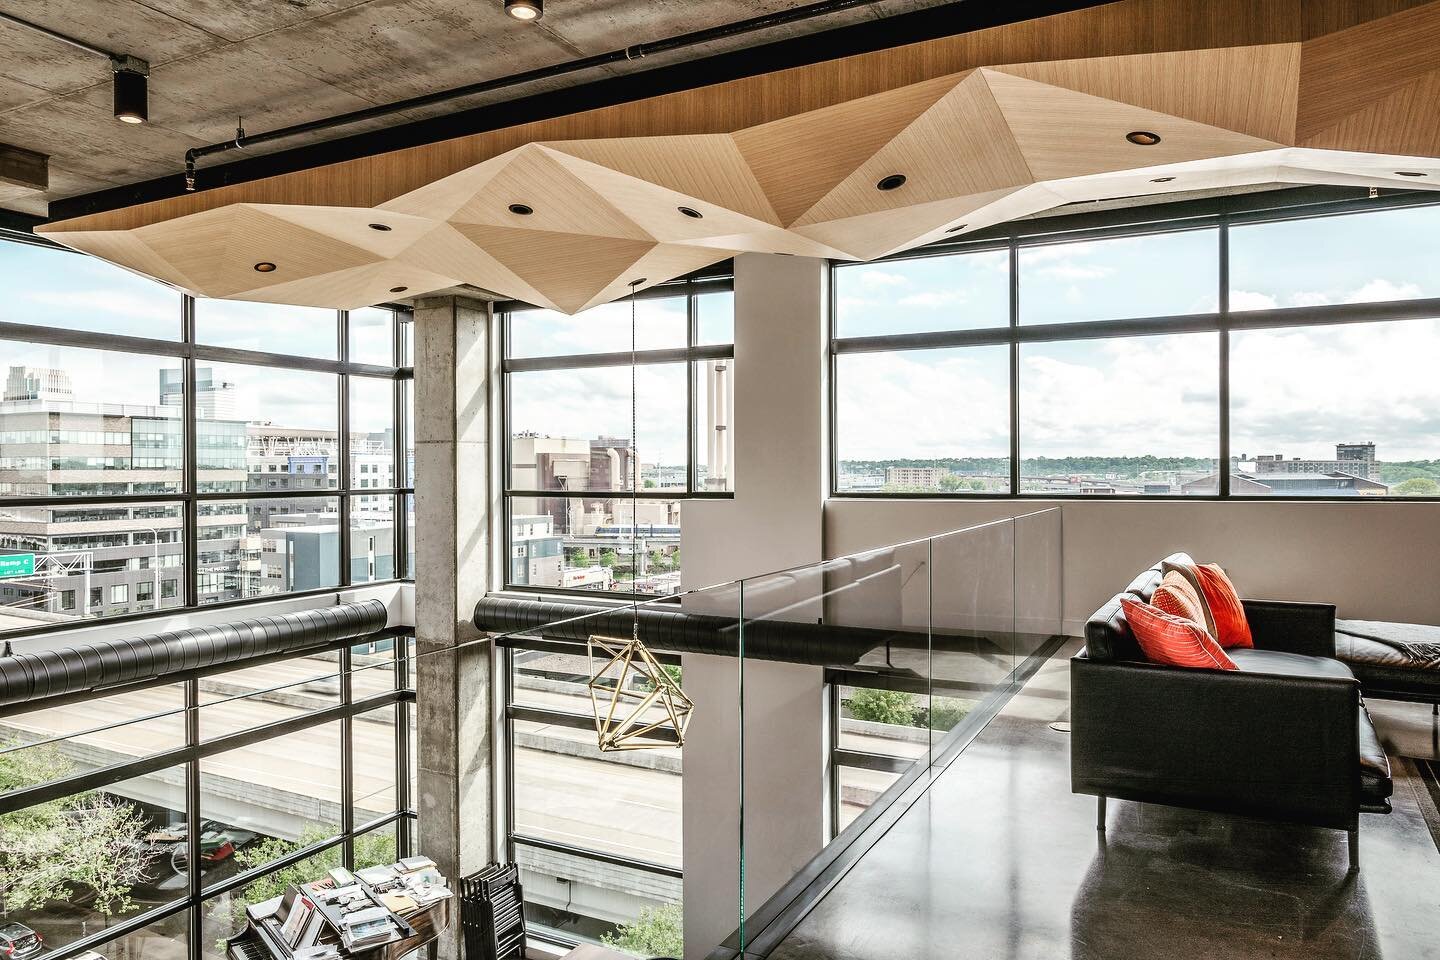 Pics from our North Loop loft renovation from 2018 for a composer who holds &lsquo;in house&rsquo; performances.  Photography by @aksel.coruh for @yourcabinetmaker #christiandeanarchitecture #loftrenovation #northloopminneapolis